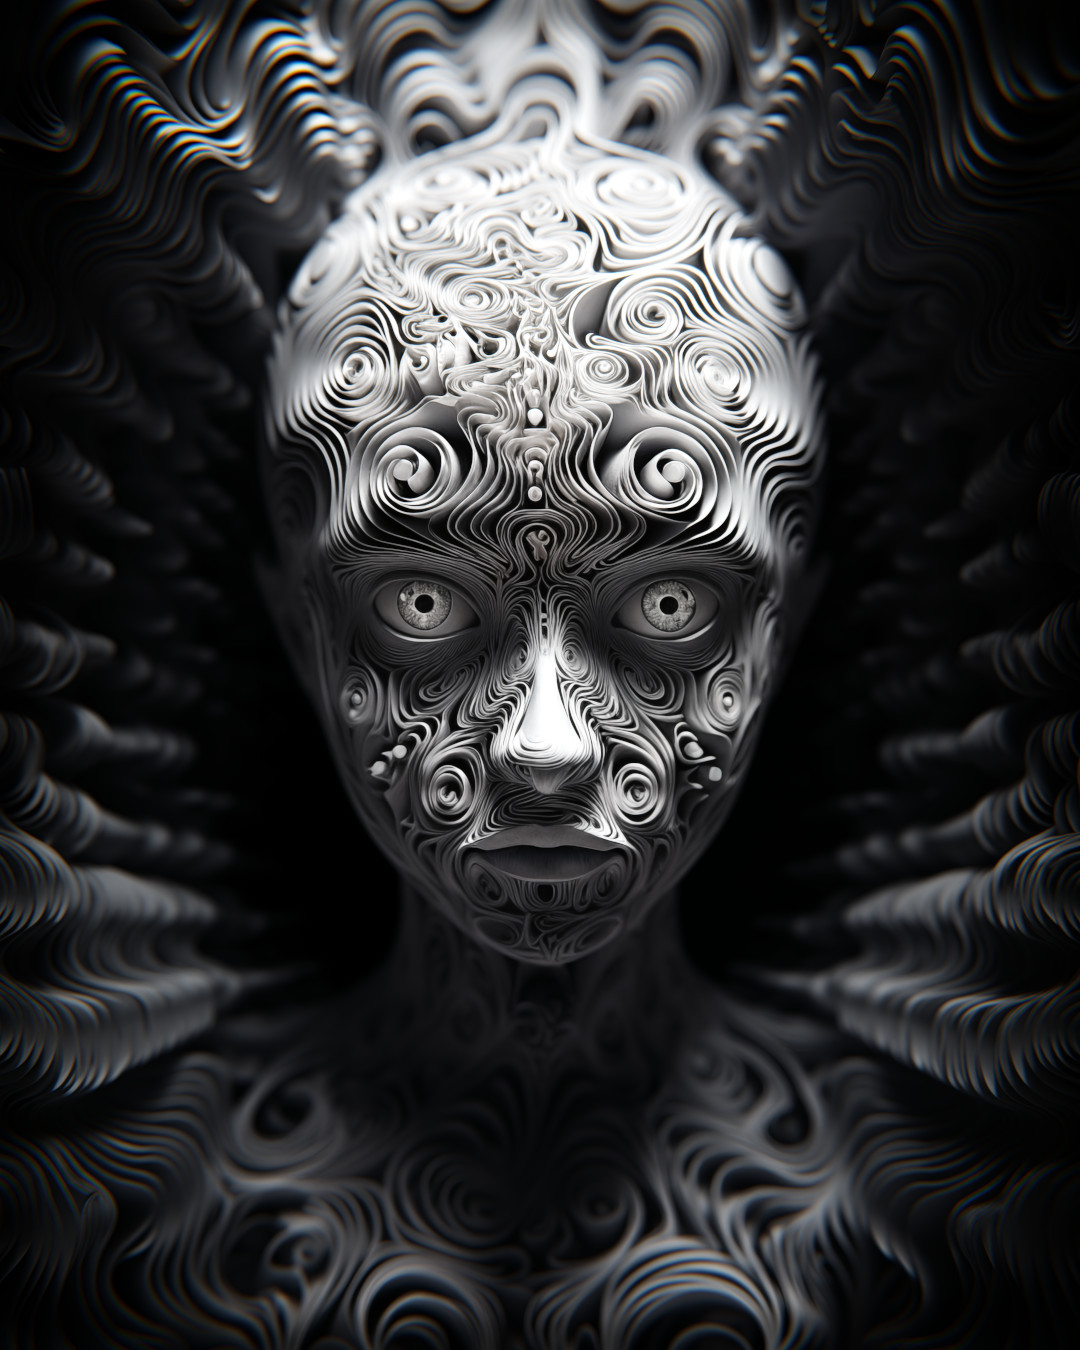 Surprised girl, intricate patterns, silver and black